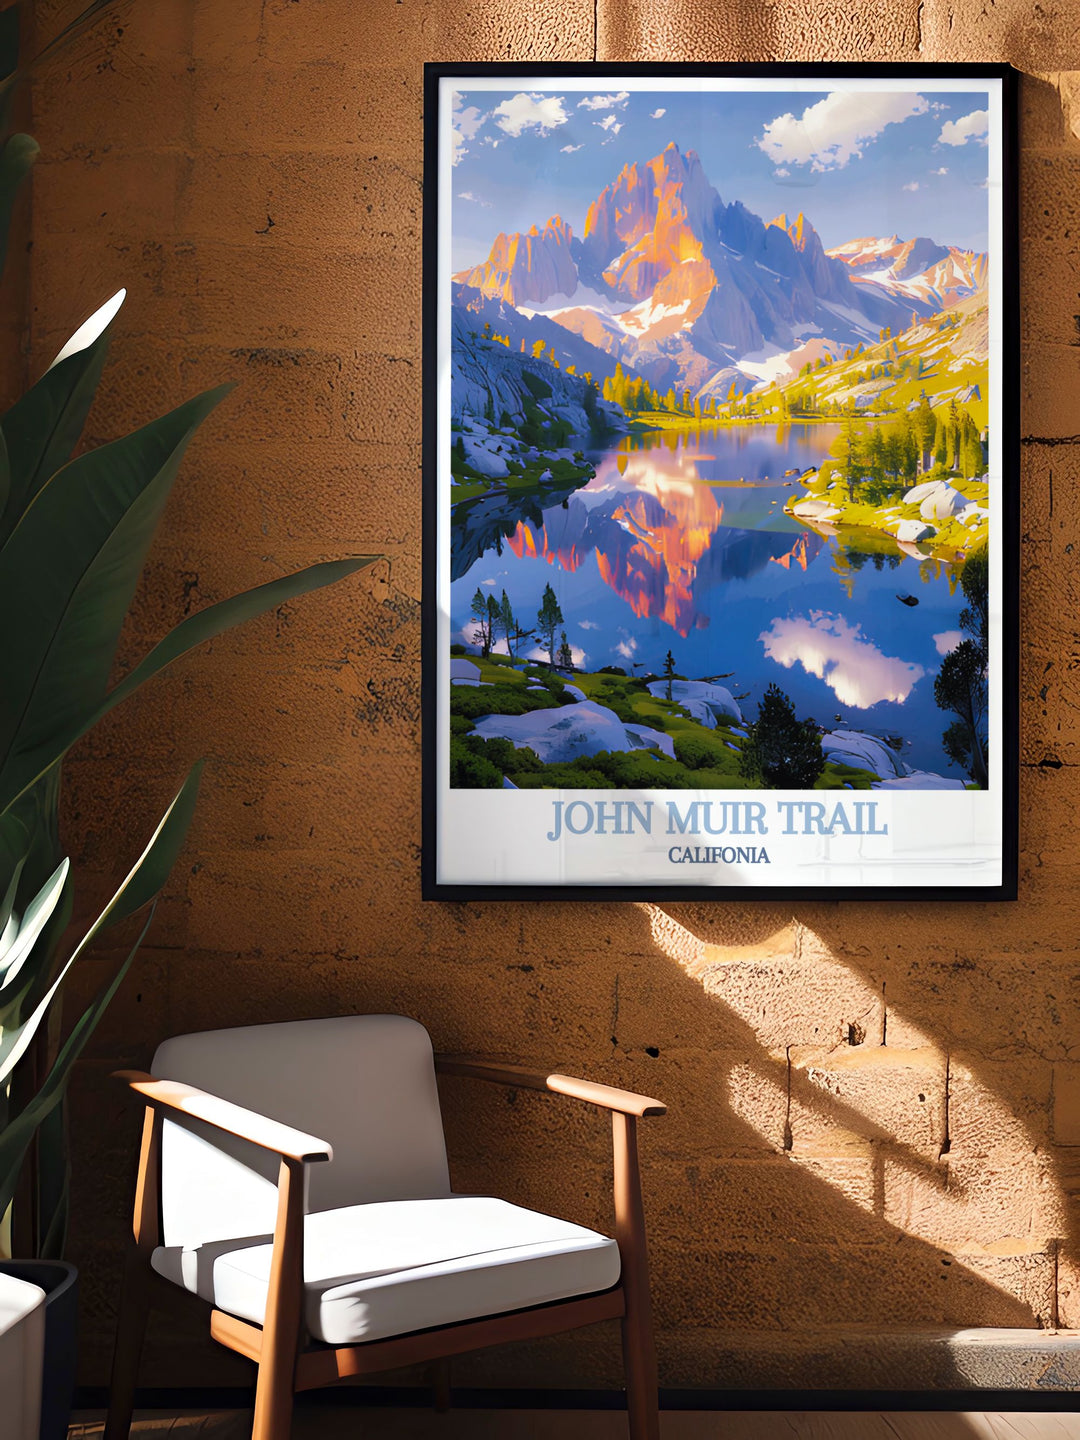 Capturing the dramatic scenery of the Ansel Adams Wilderness, this travel poster brings the stunning beauty of this pristine area into your home decor. Perfect for those who love rugged landscapes and serene wilderness.